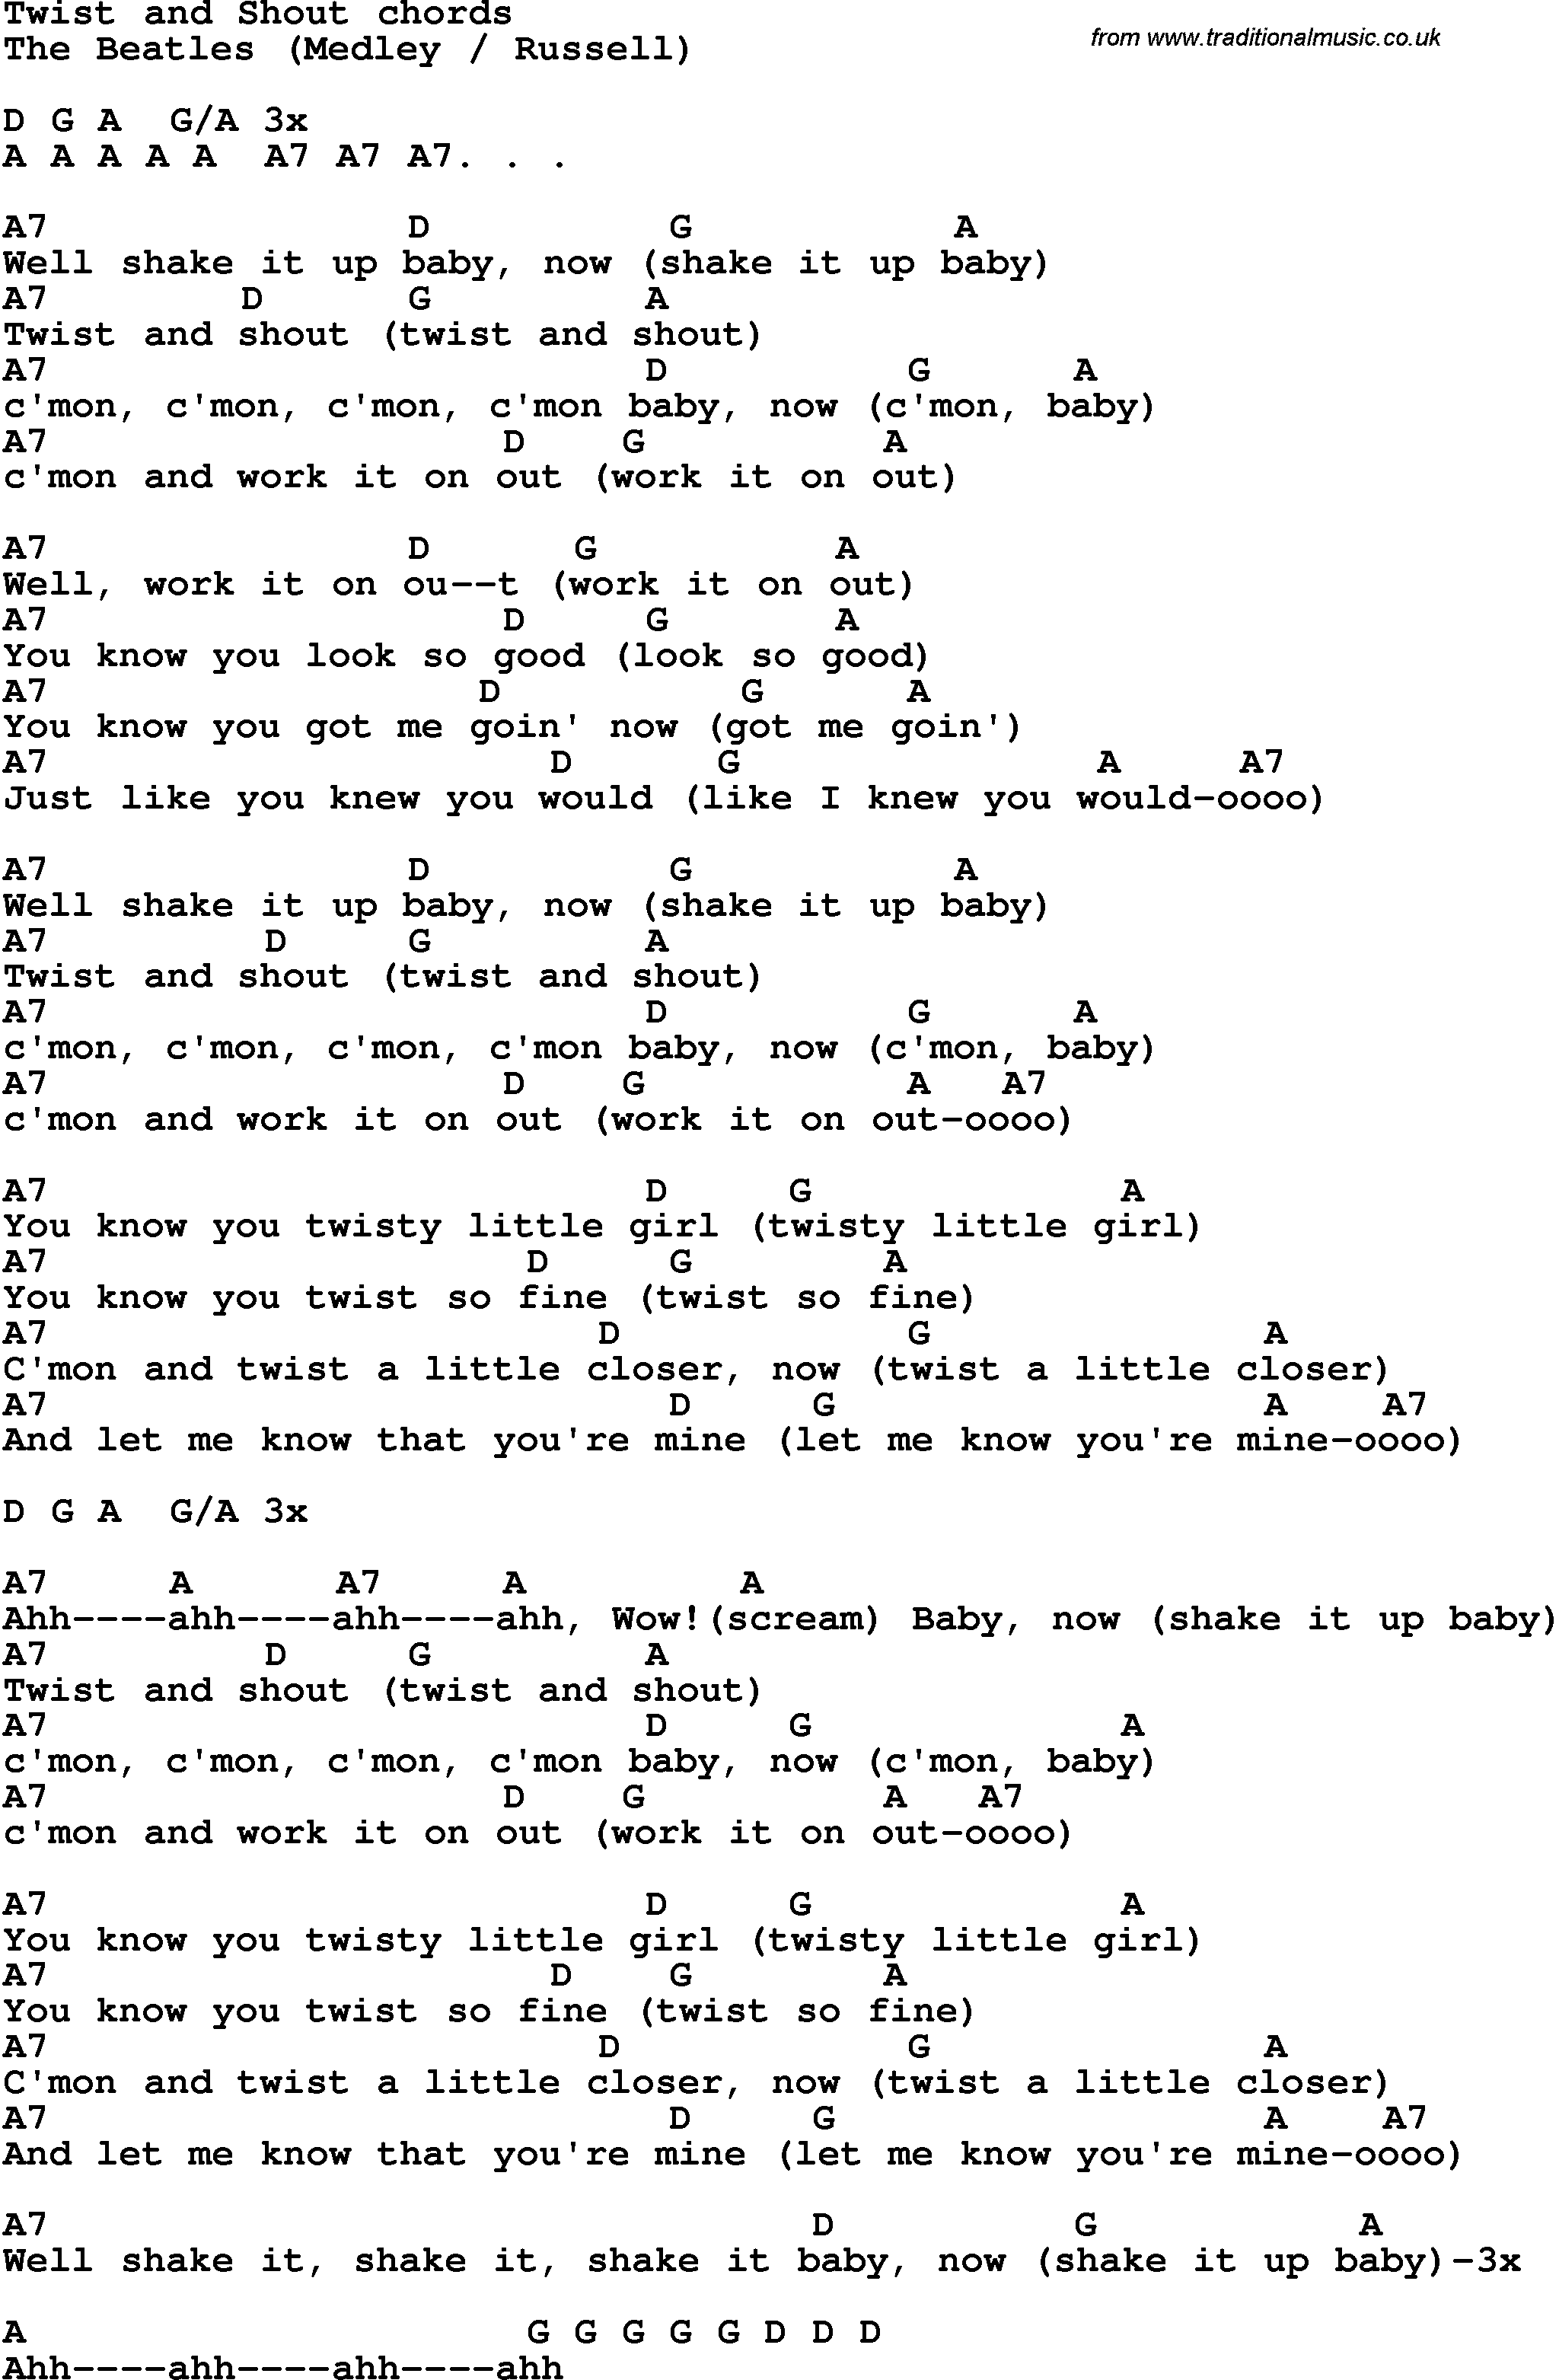 Song Lyrics with guitar chords for Twist And Shout